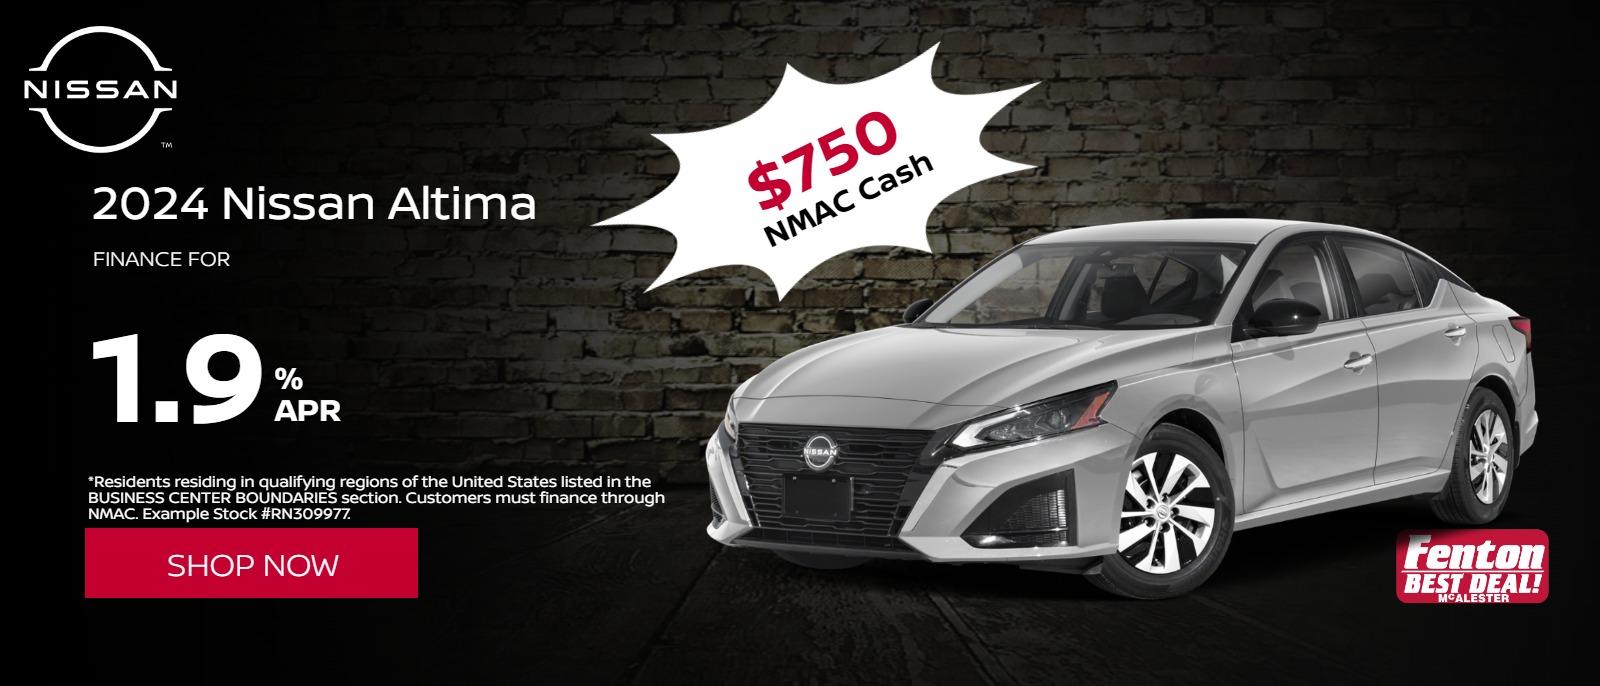 24 Altima
1.9% APR
 Financing available on 2024 Nissan Altima
*Residents residing in qualifying regions of the United States listed in the BUSINESS CENTER BOUNDARIES section. Customers must finance through NMAC